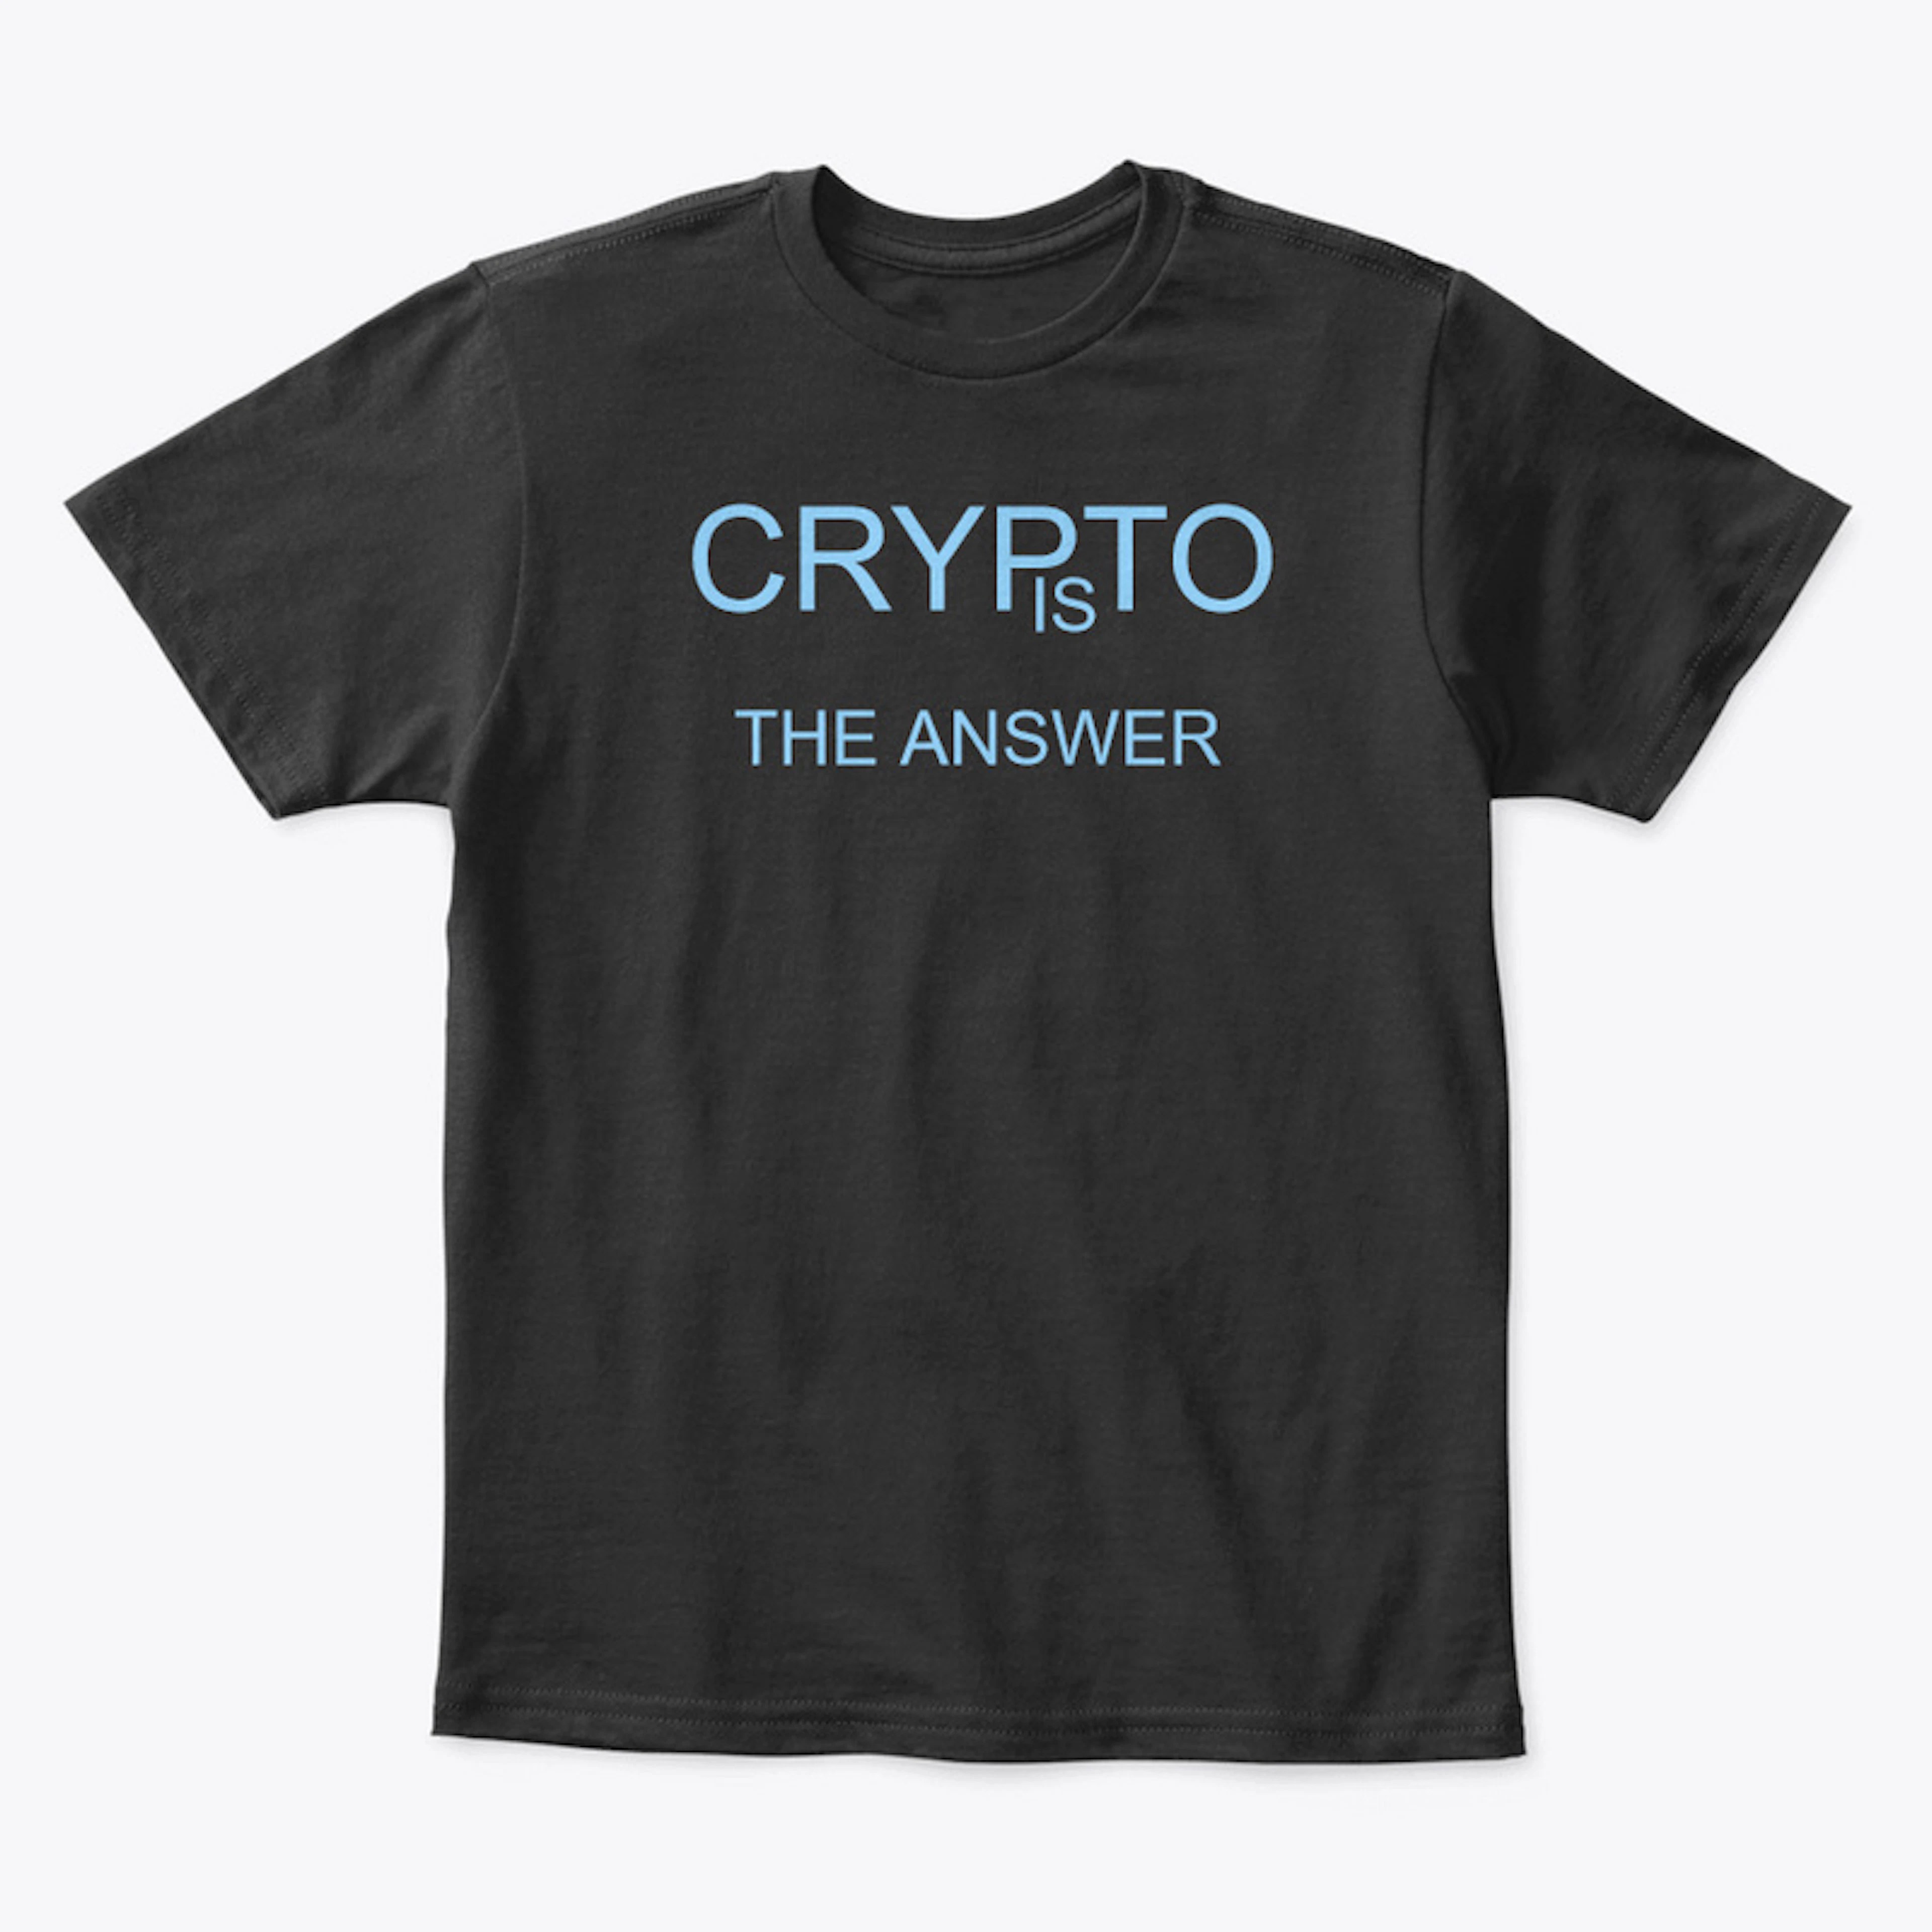 Crypto is the answer